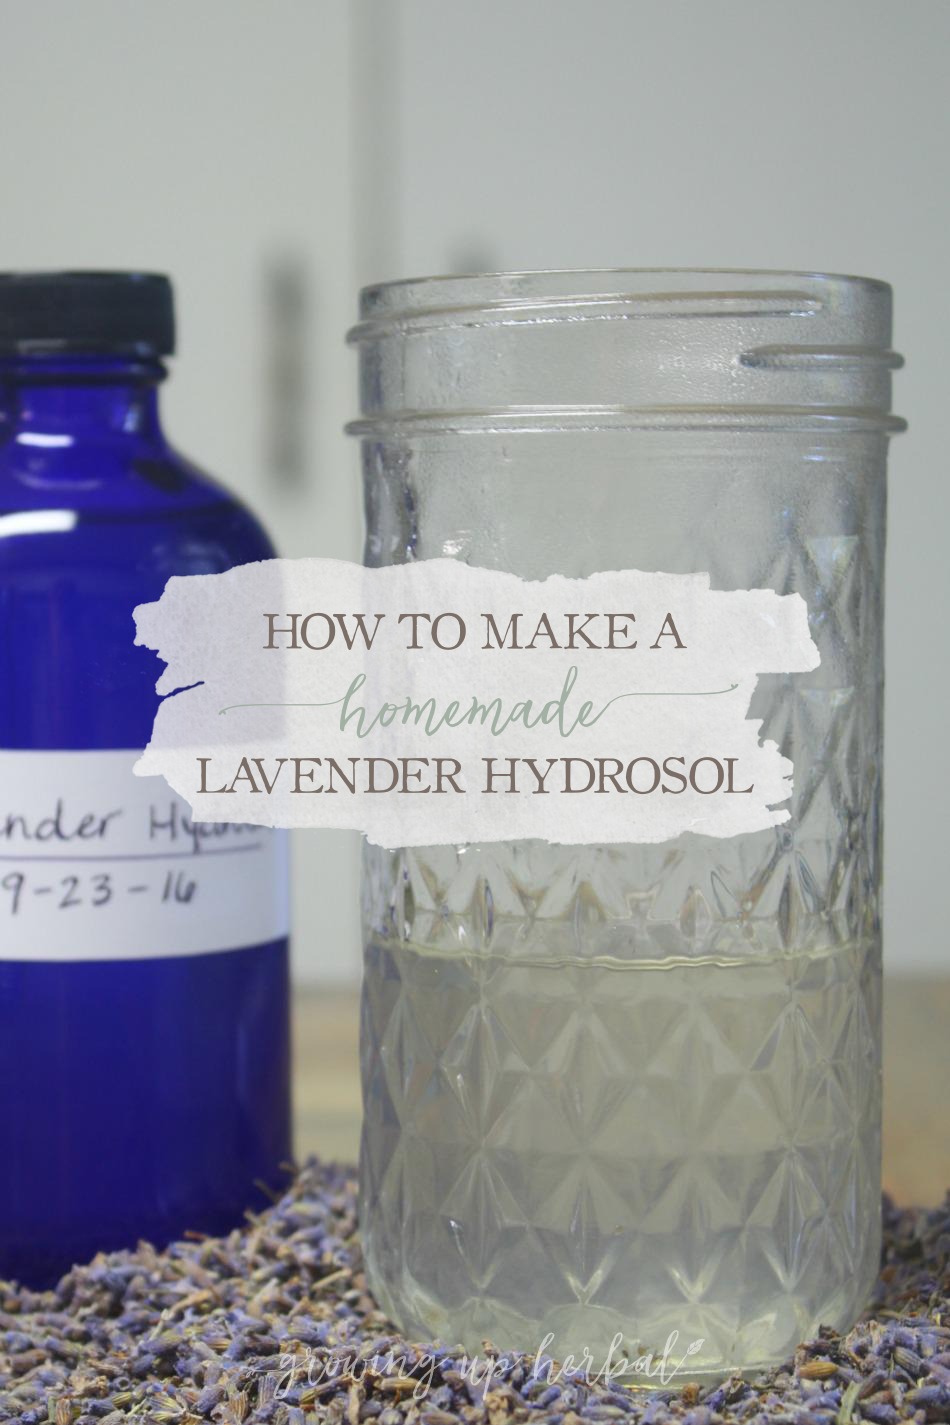 Homemade Lavender Hydrosol Tutorial | Growing Up Herbal | Learn how to make and use a homemade lavender hydrosol for better health!